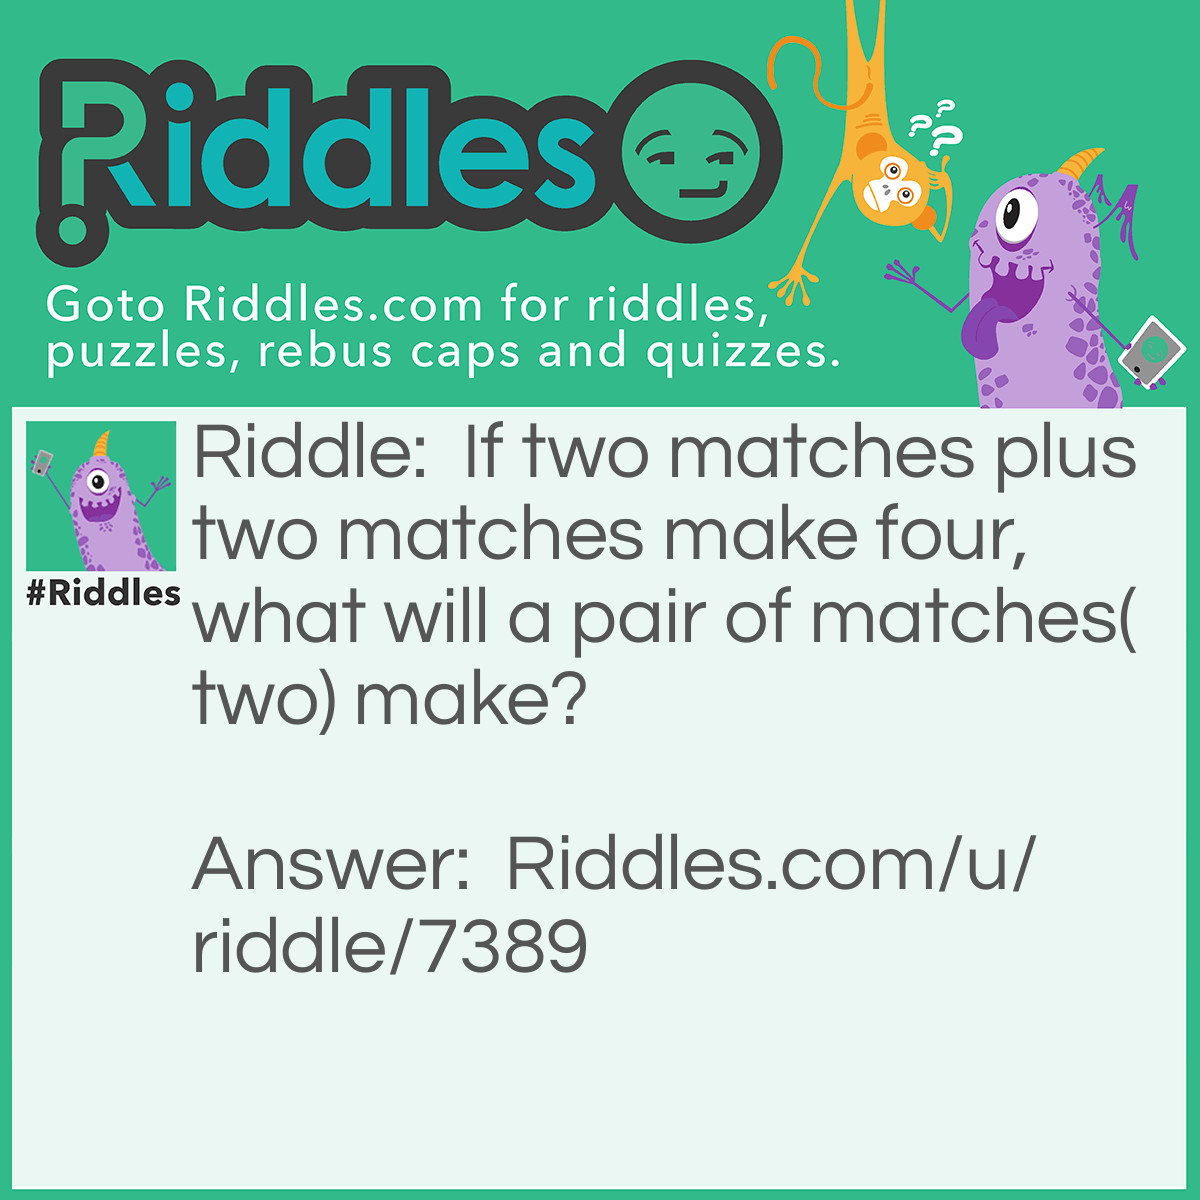 Riddle: If two matches plus two matches make four, what will a pair of matches(two) make? Answer: Eleven ( 1 + 1 makes a number 11).